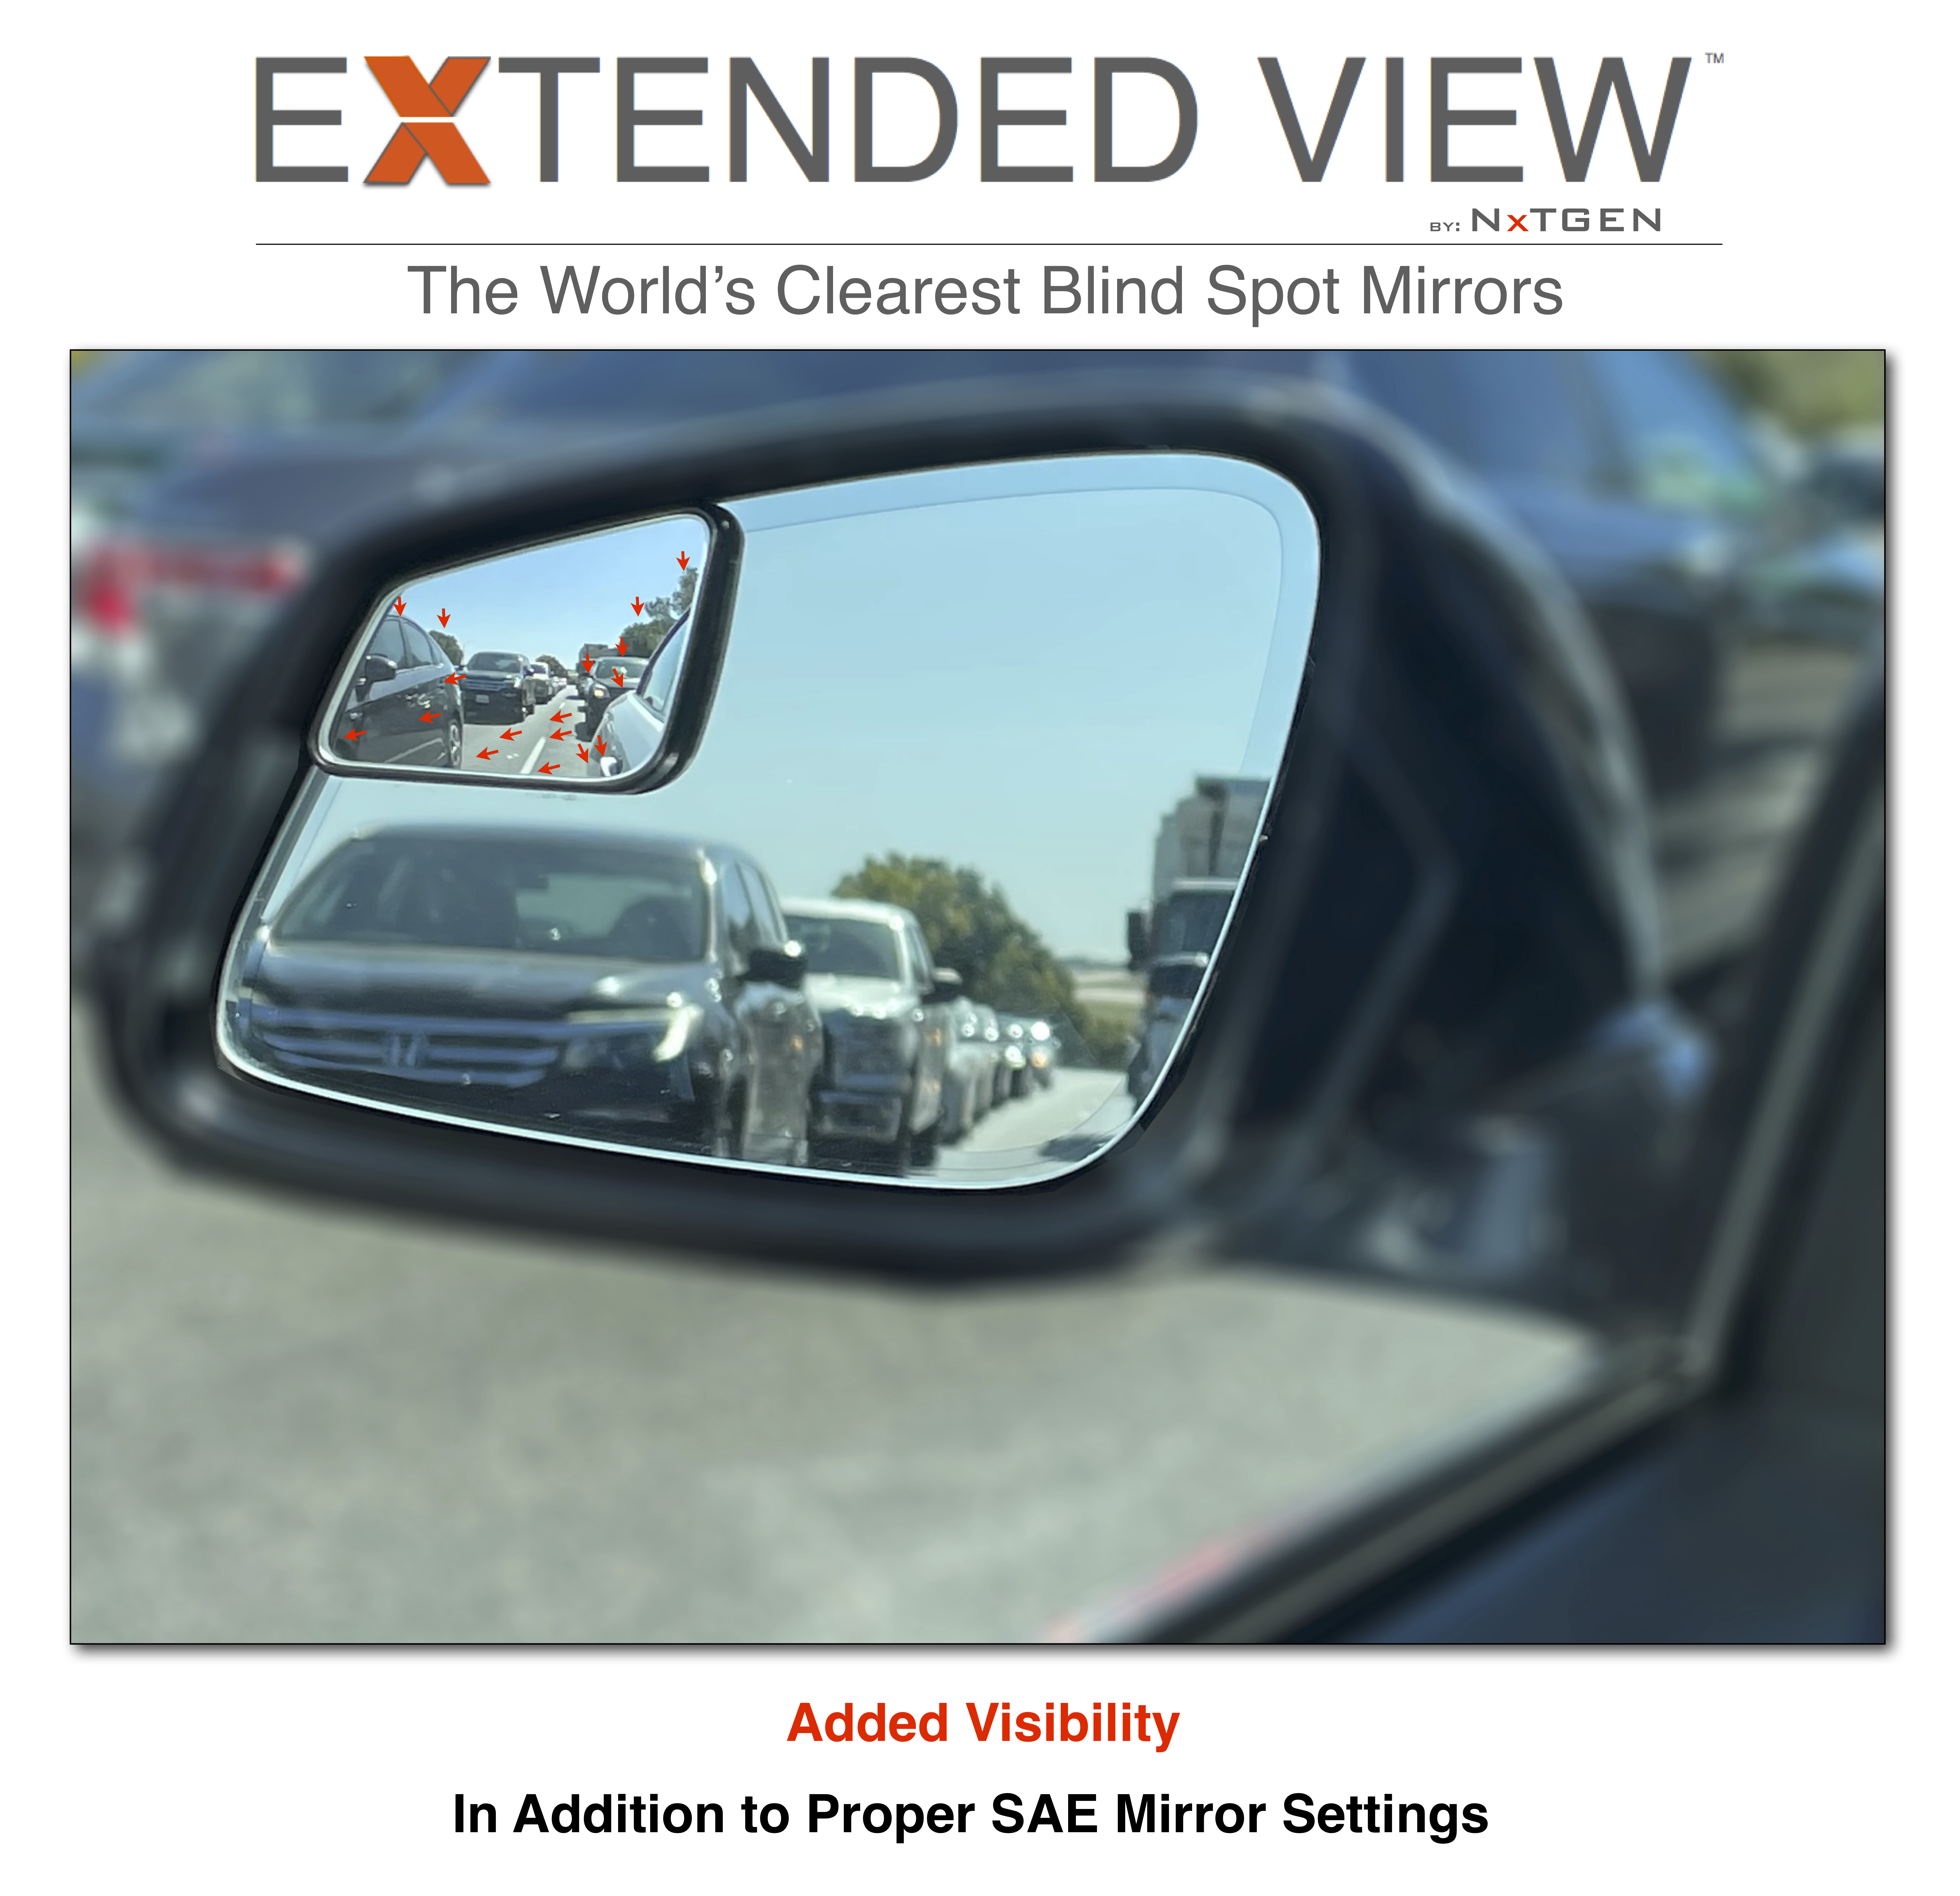 BMW X1 Blind Spot Mirrors | E84 Extended View™